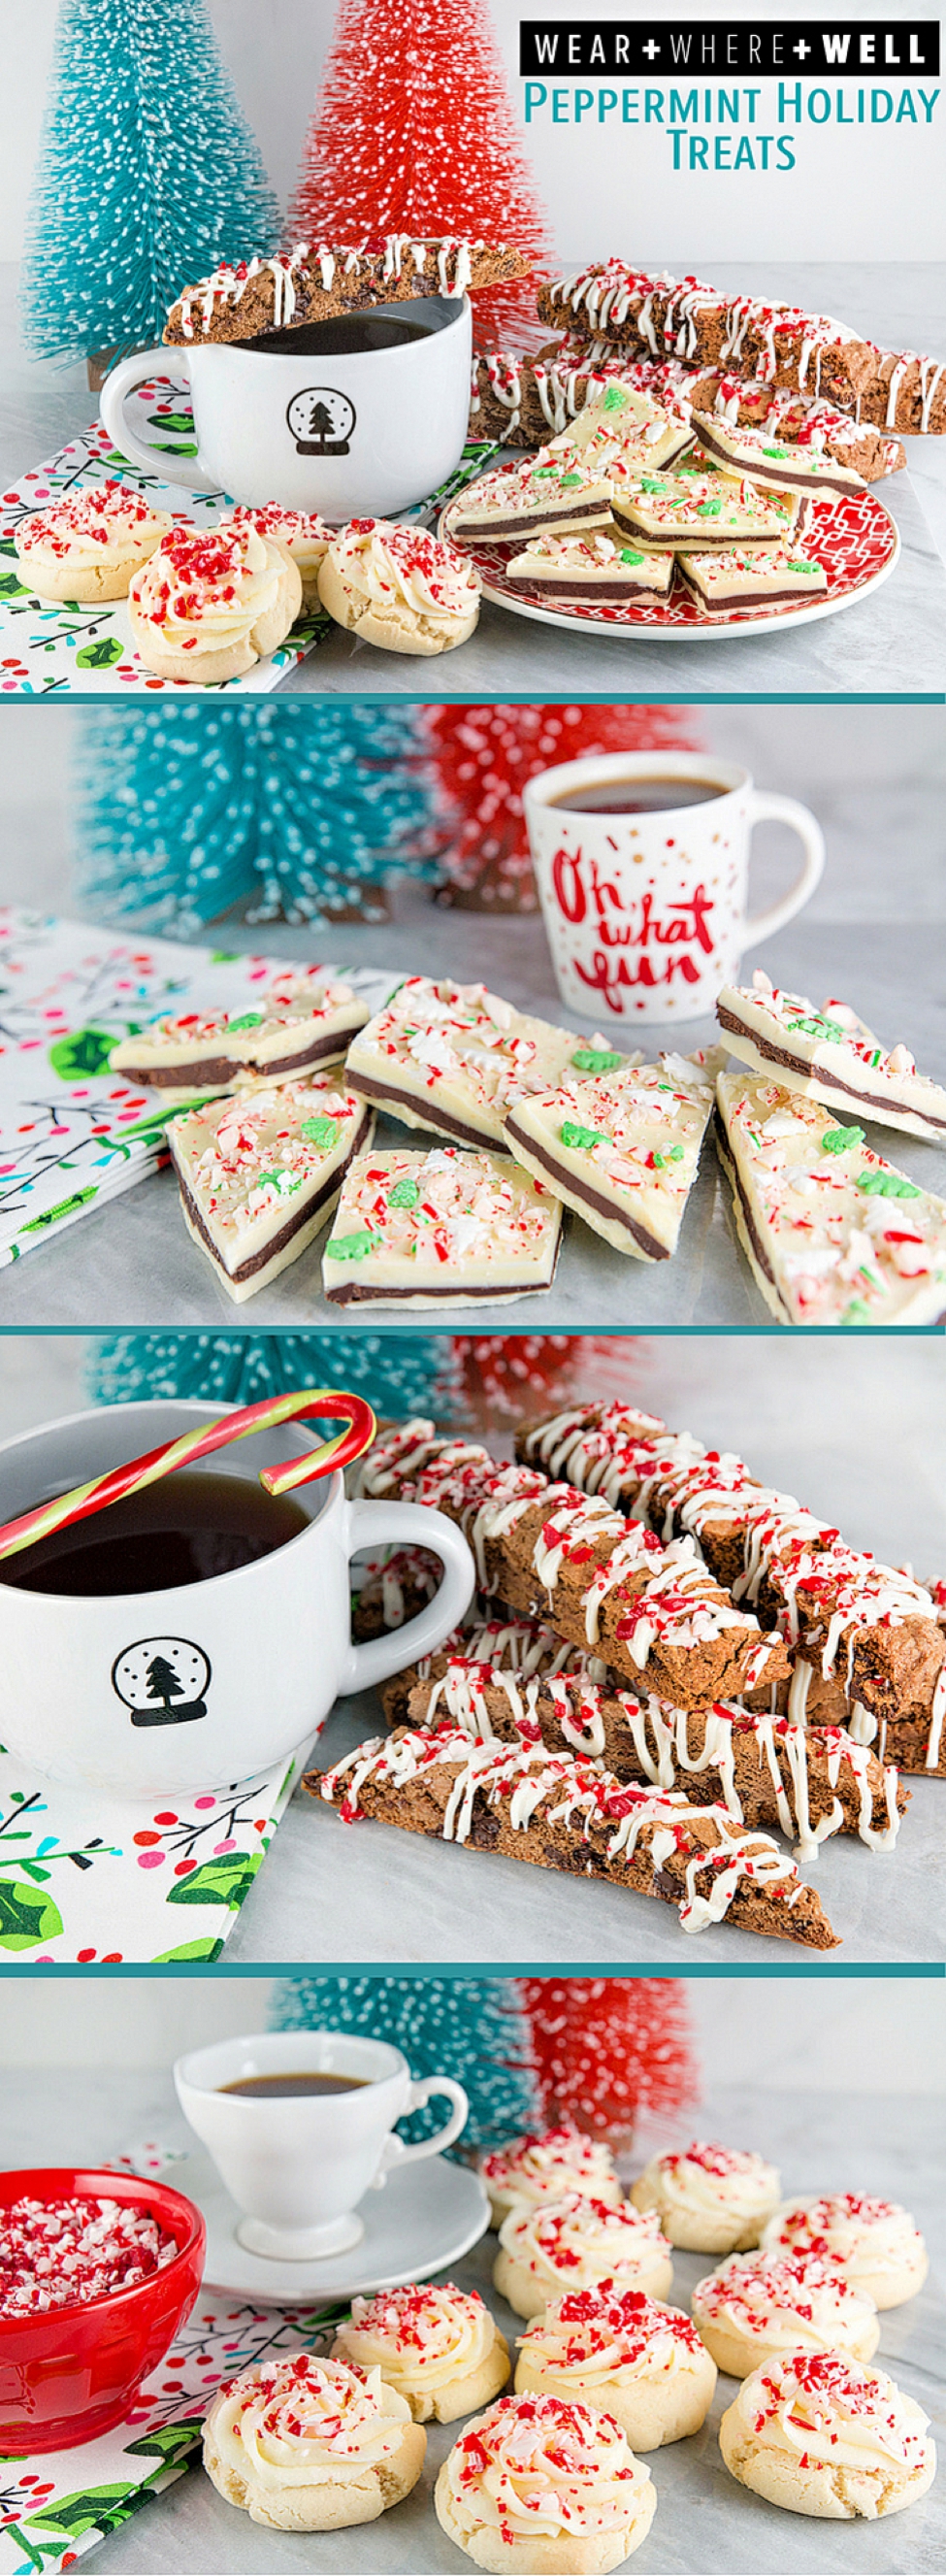 wear-where-well-peppermint-holiday-treats_0005